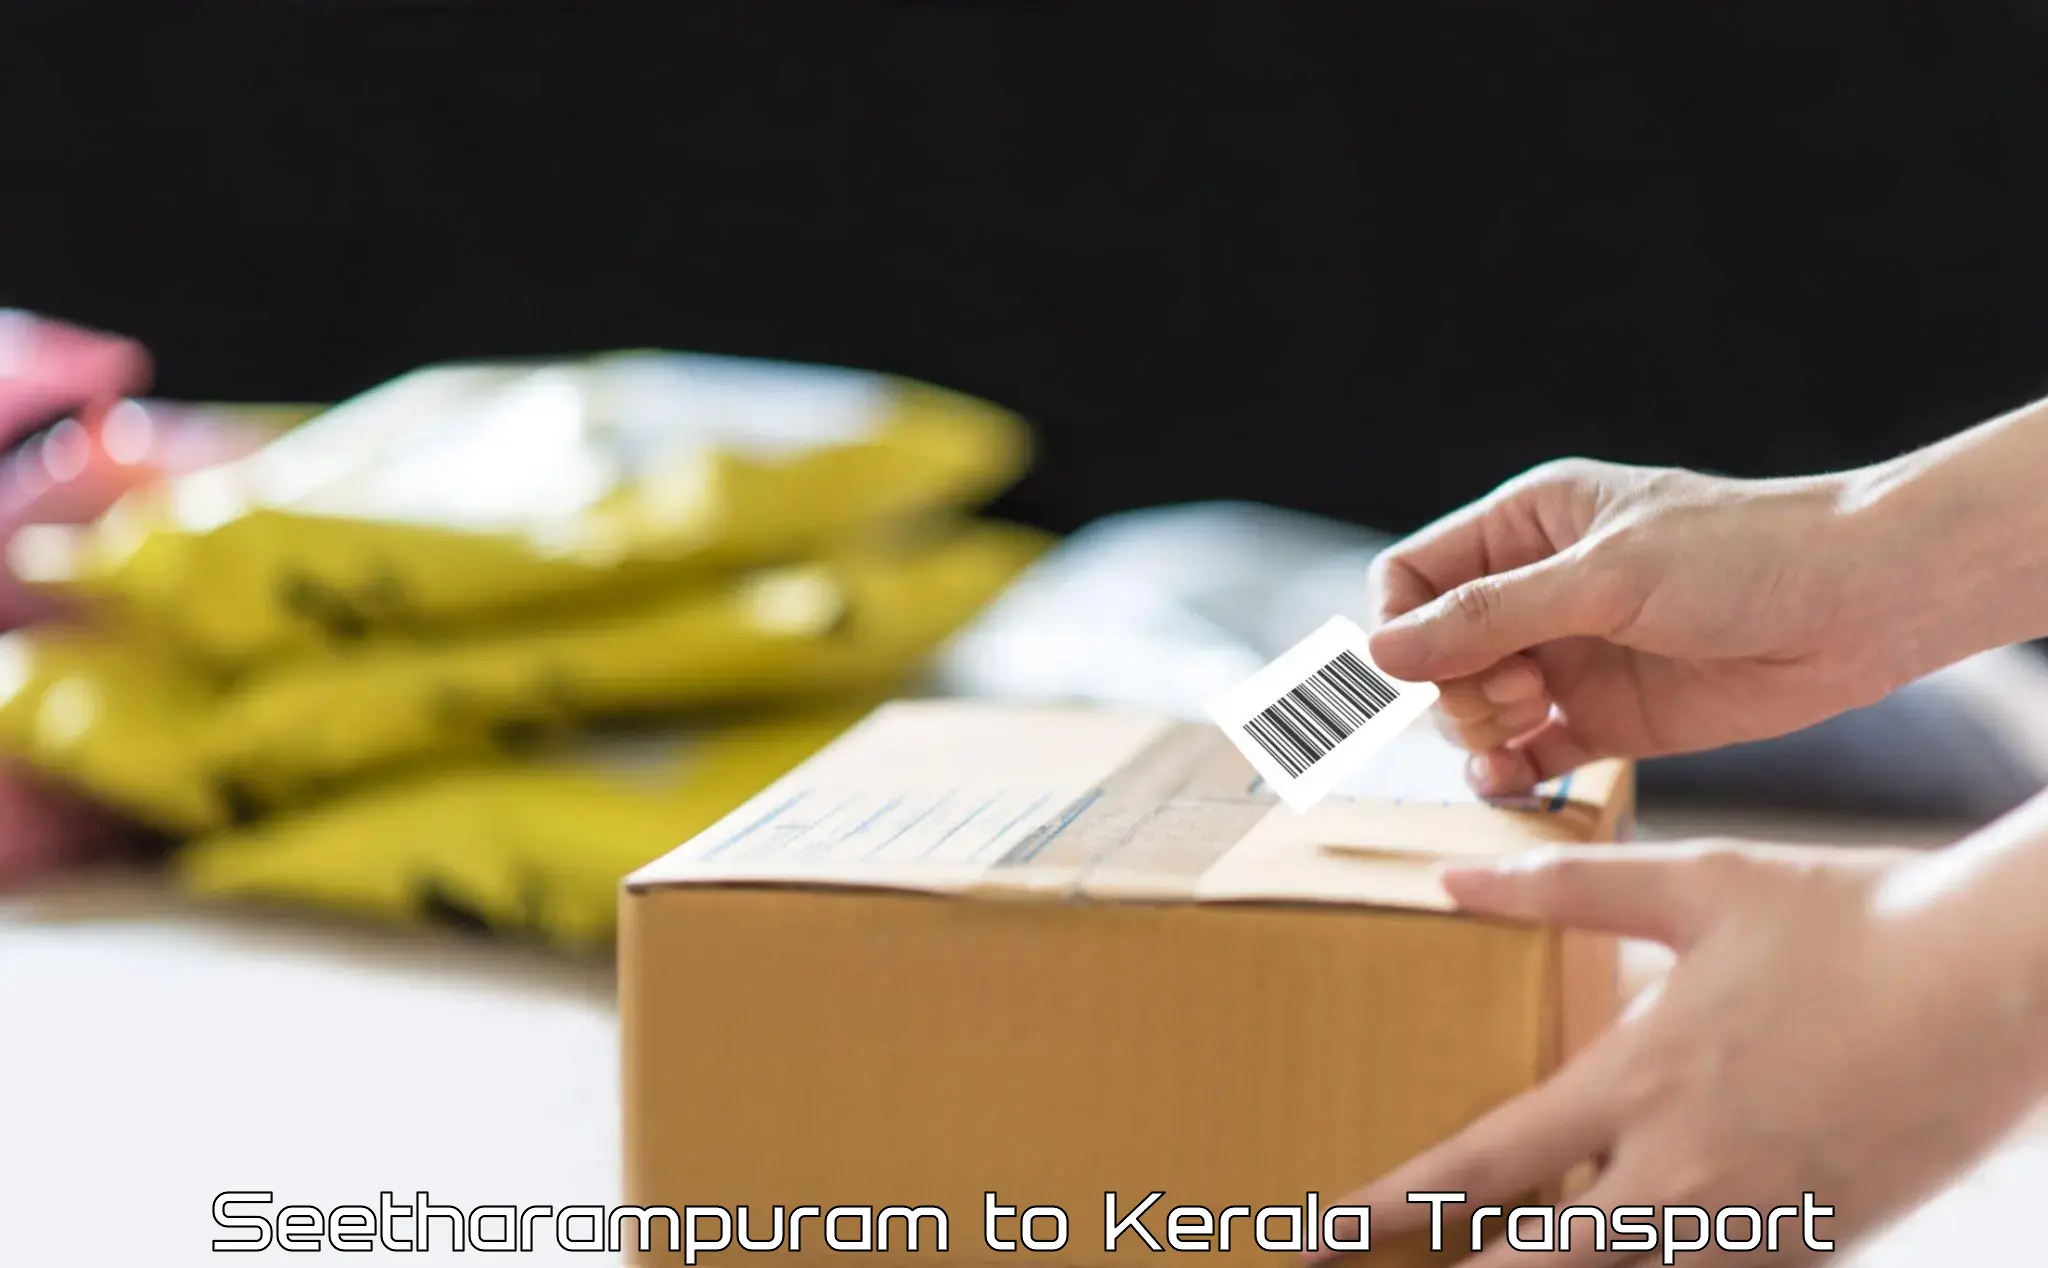 Goods delivery service Seetharampuram to Chalakudy